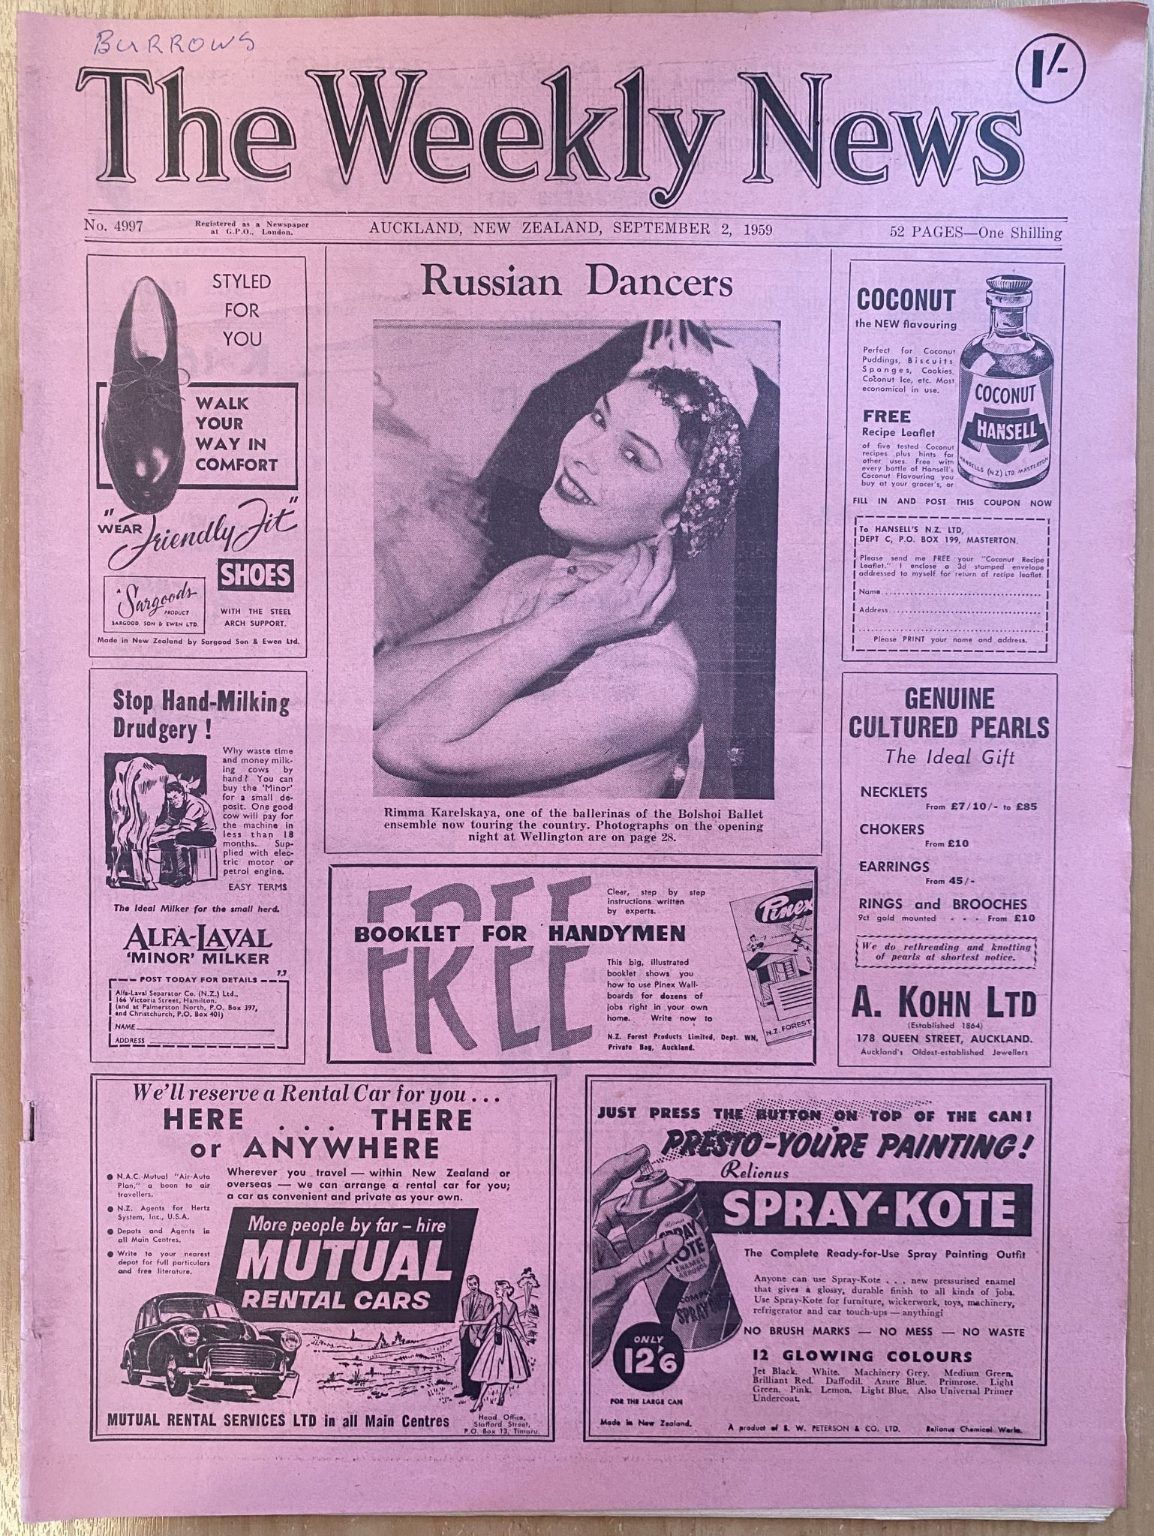 OLD NEWSPAPER: The Weekly News - No. 4997, 2 September 1959